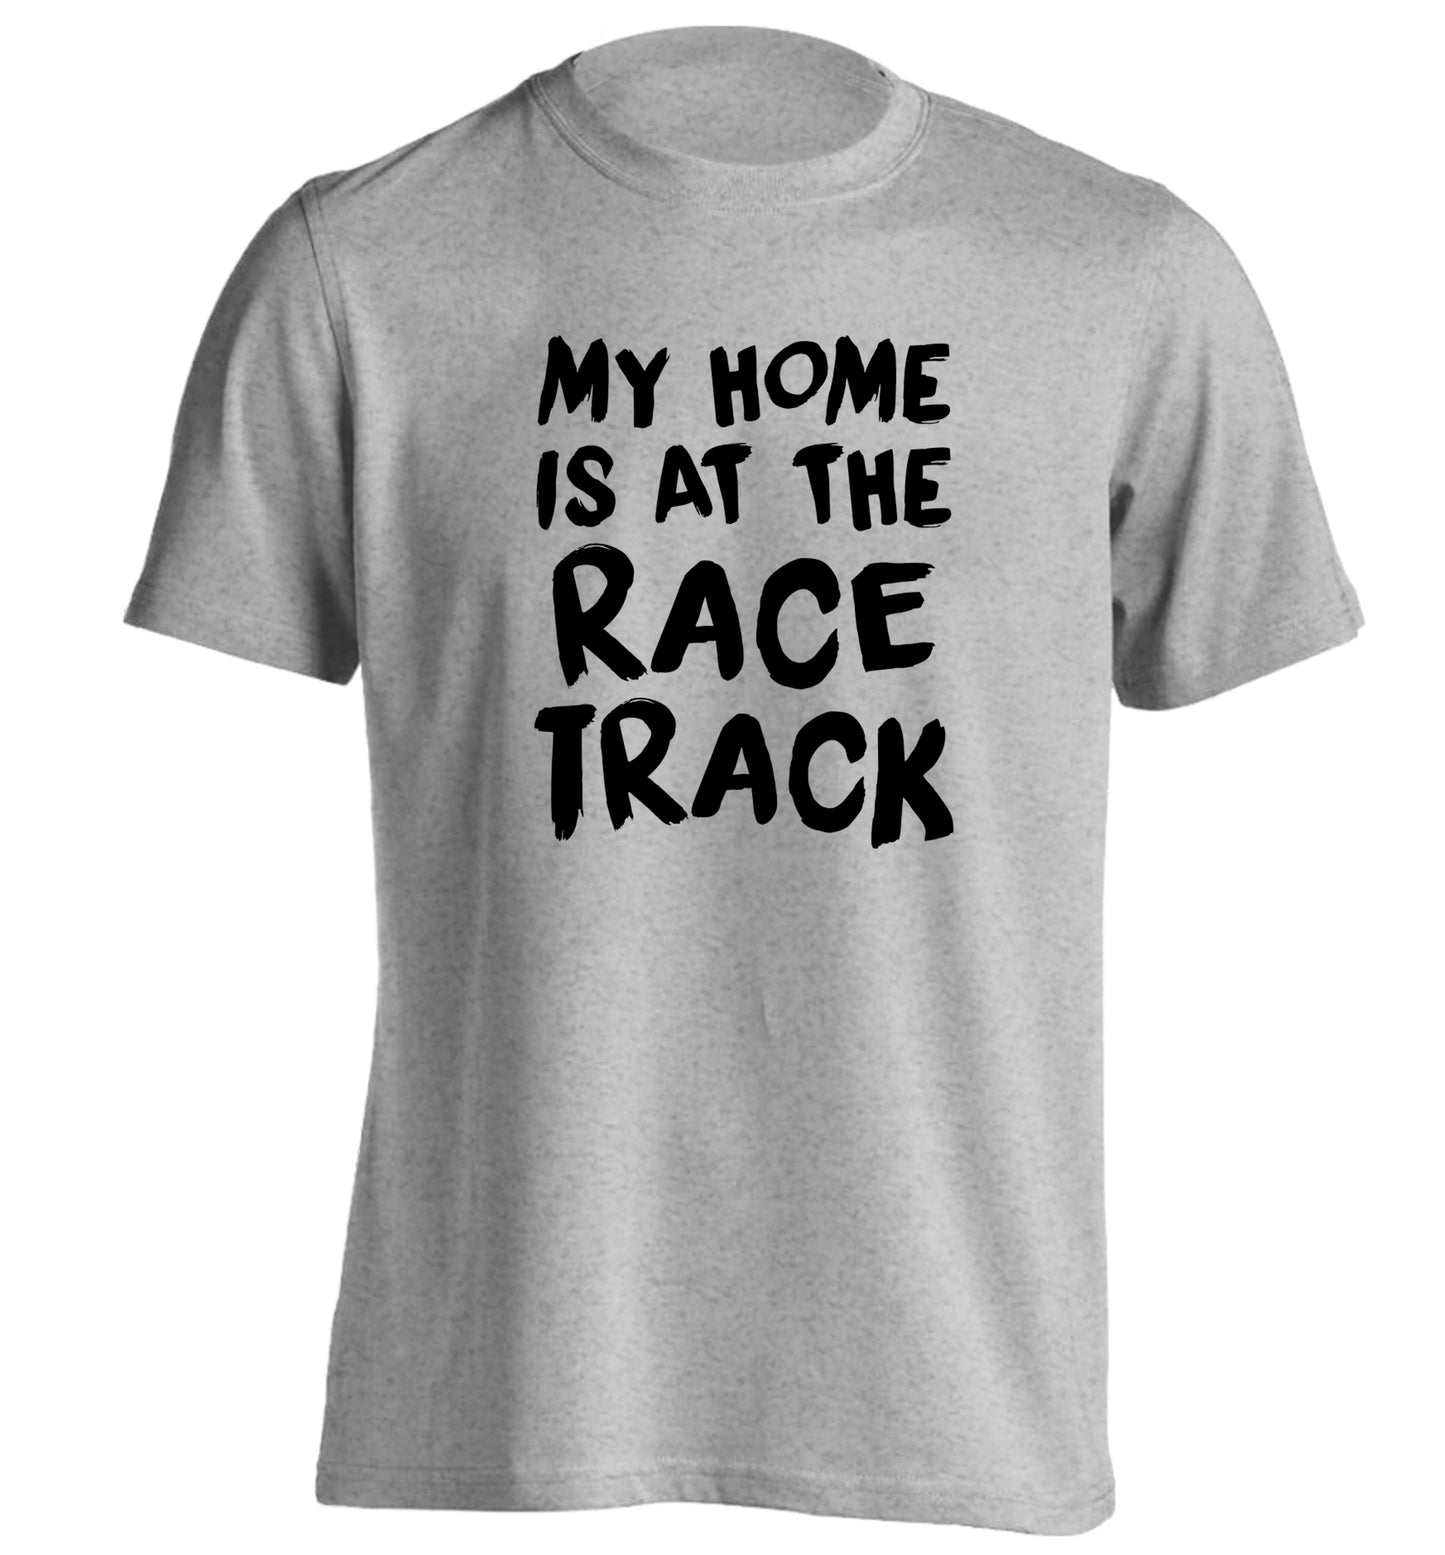 My home is at the race track adults unisex grey Tshirt 2XL